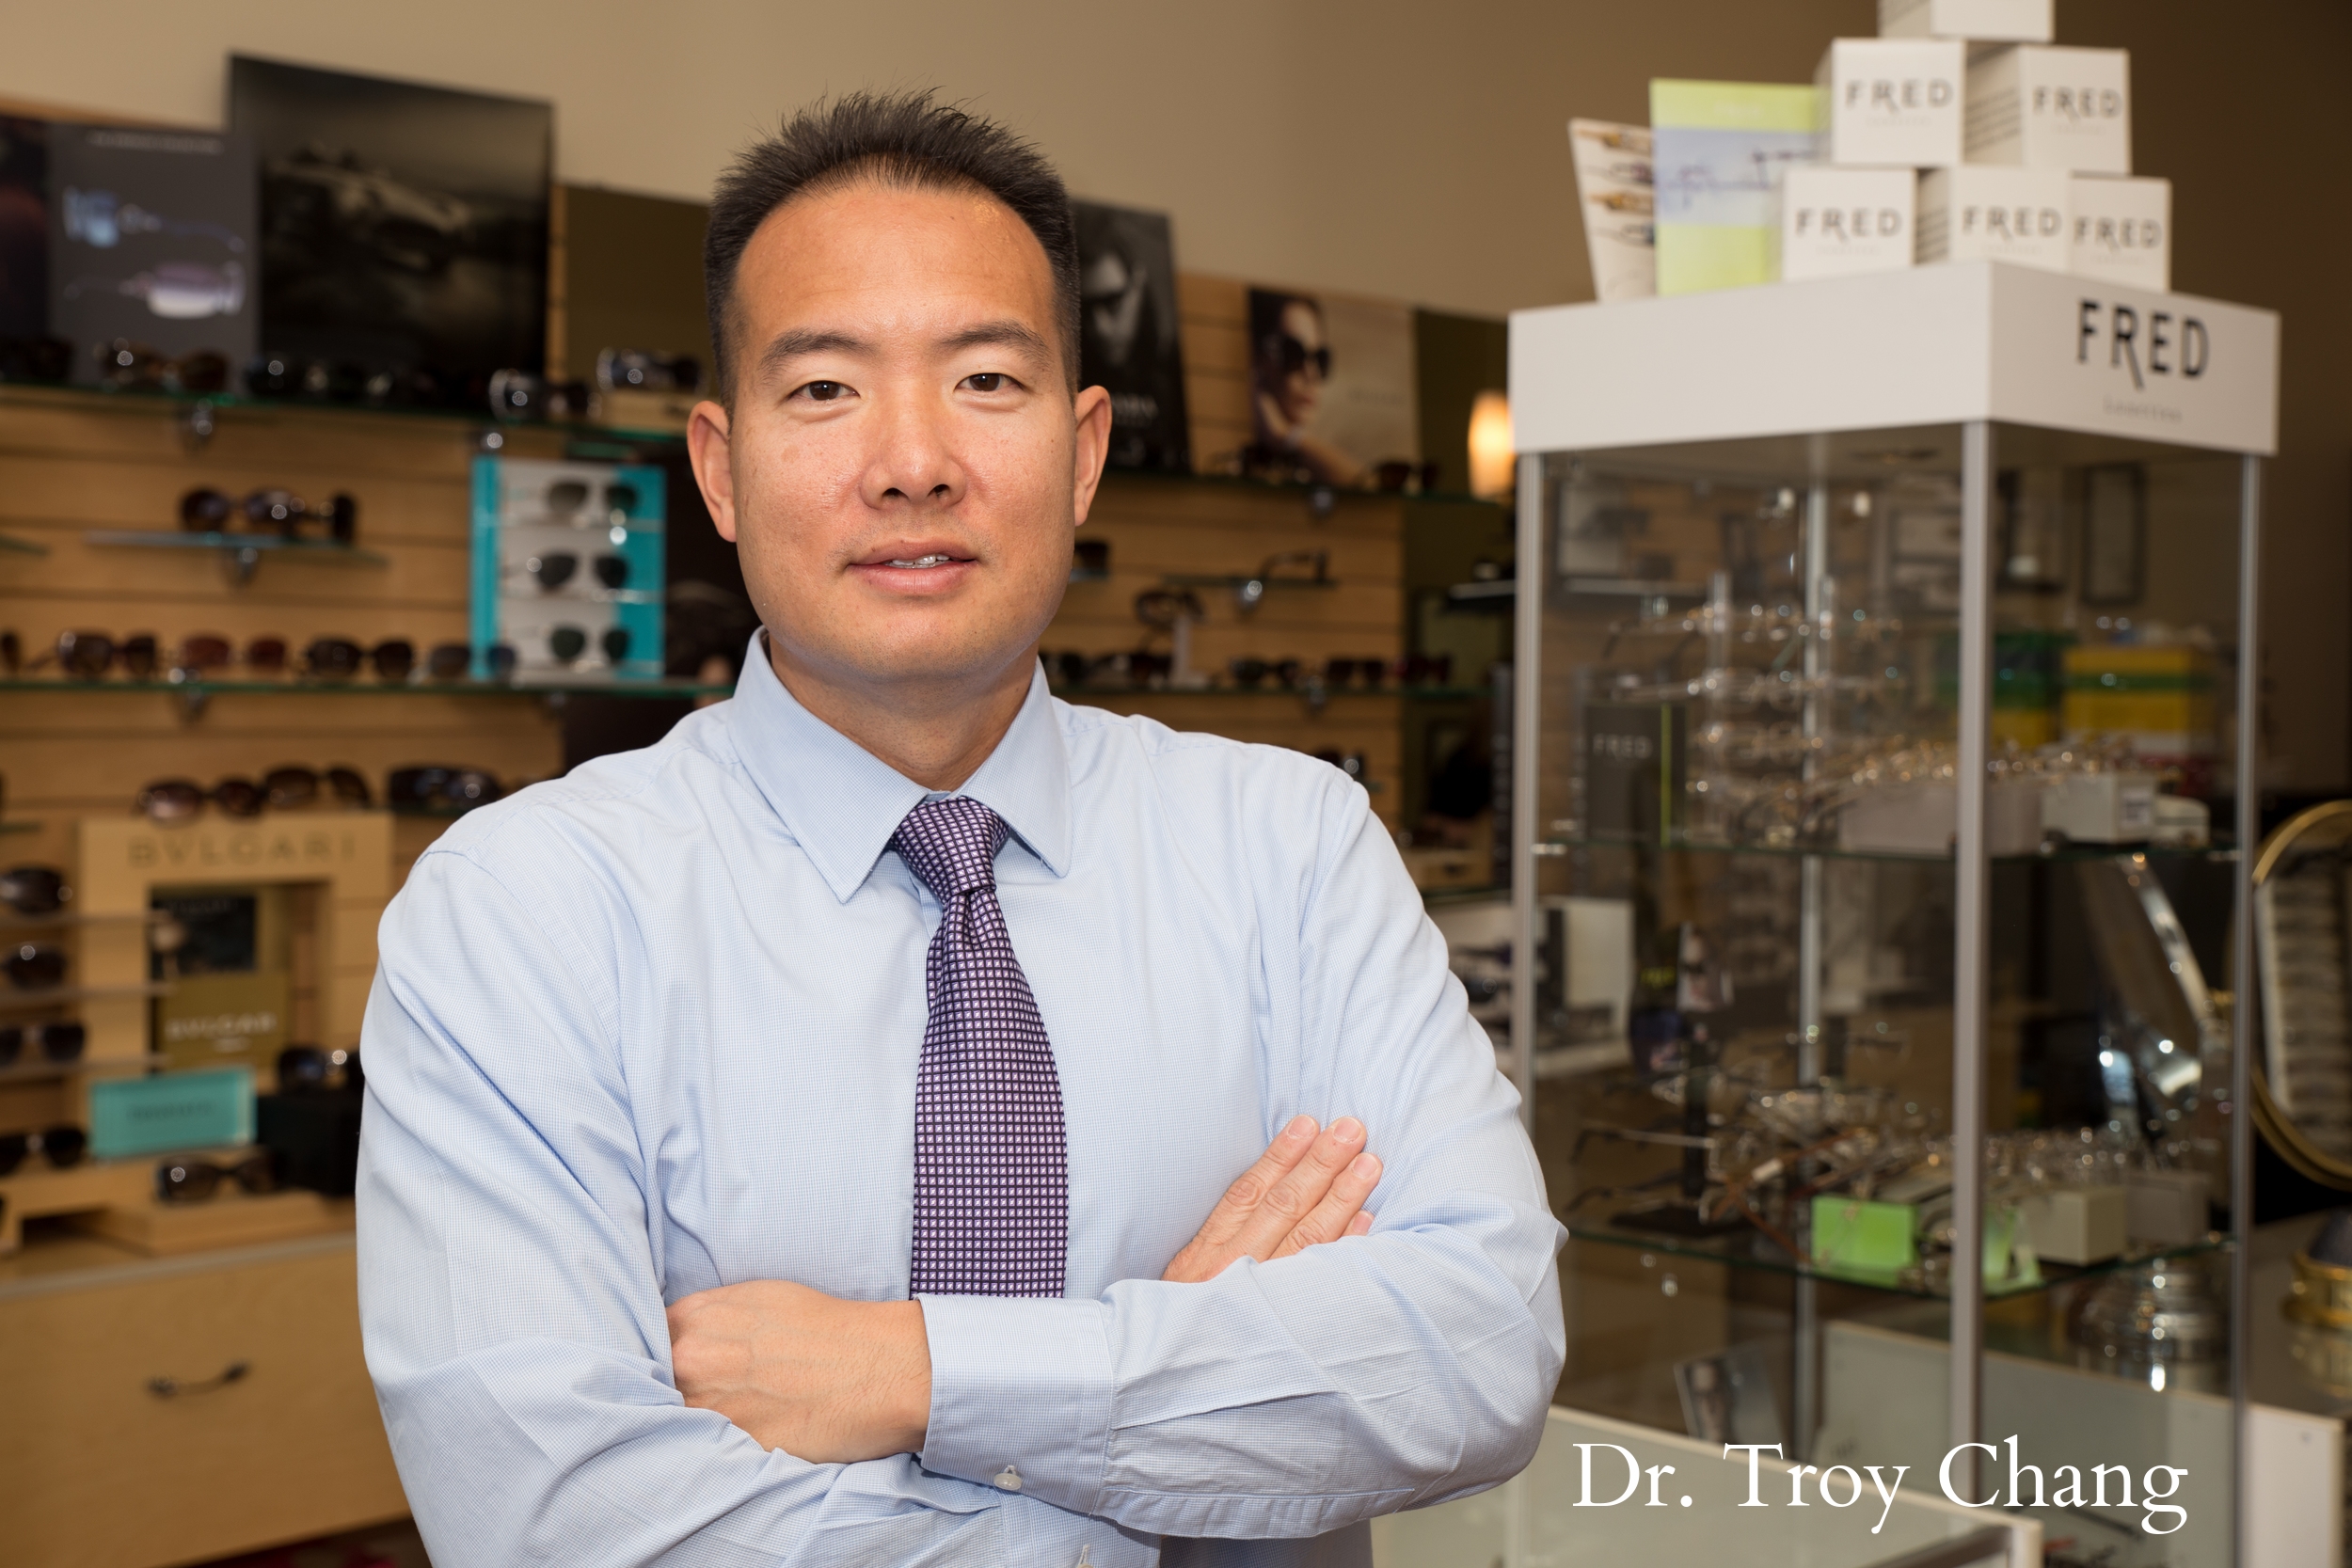 Dr. Troy Chang of Vegas Vision